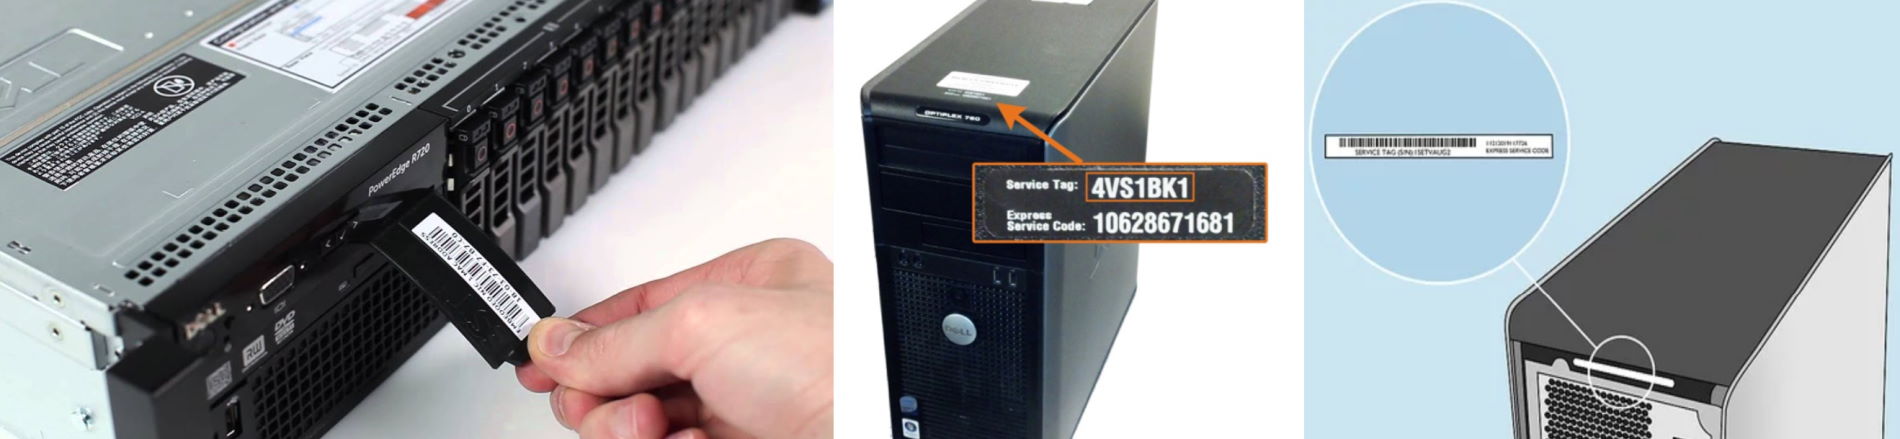 SOLVED: 7 Easy Ways To Find The Service Tag Serial Number of a Dell Server,  PC or Laptop | Up & Running Technologies, Tech How To's